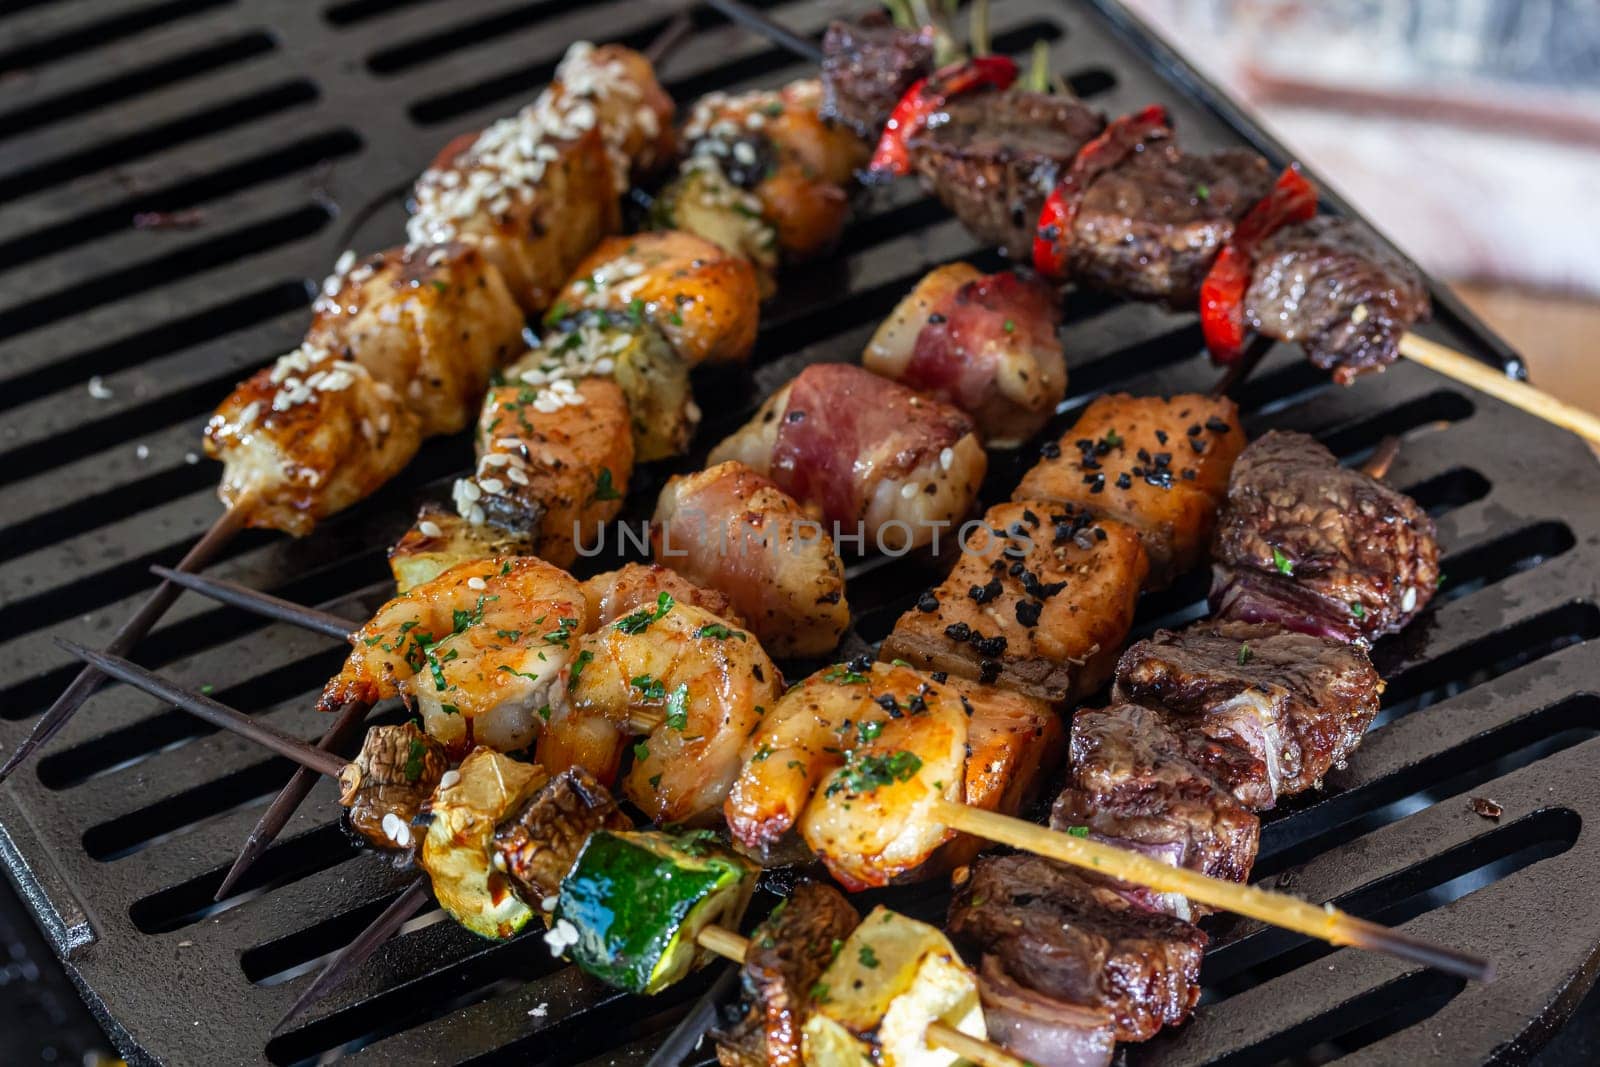 A lot of mini-kebabs of meat, fish, chicken, shrimp, vegetables on wooden skewers are fried on a small cast-iron grill by Milanchikov